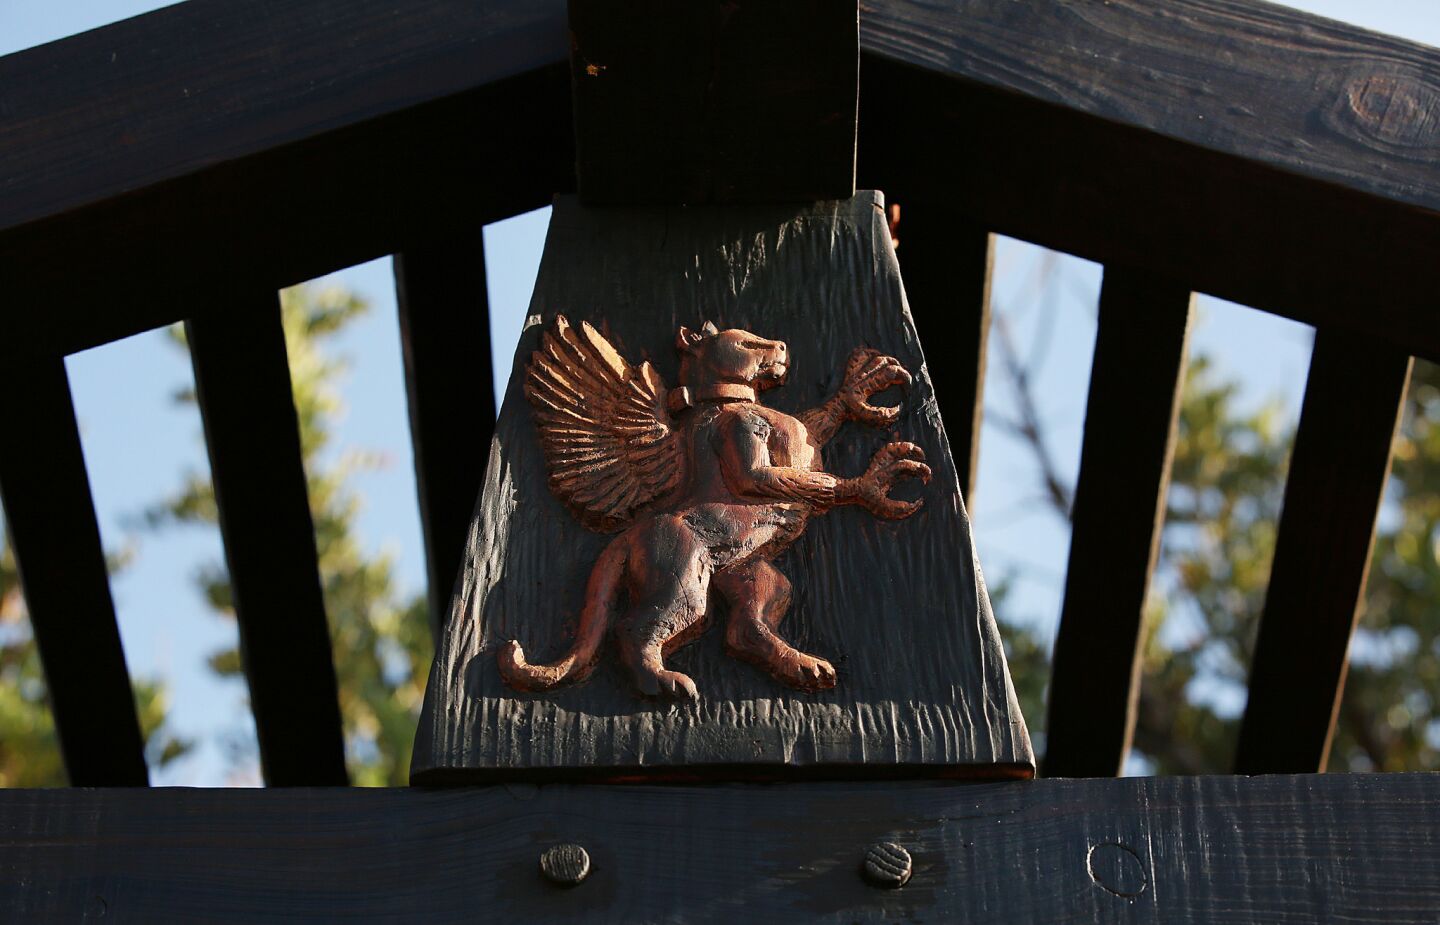 The teahouse is decorated with a hand-carved image of a mythological griffin. In honor of Los Angeles, it is part red-tailed hawk (common to the area) and part mountain lion (like P-22, the famous mountain lion spotted in the area). The creature is shown wearing a tracking collar.